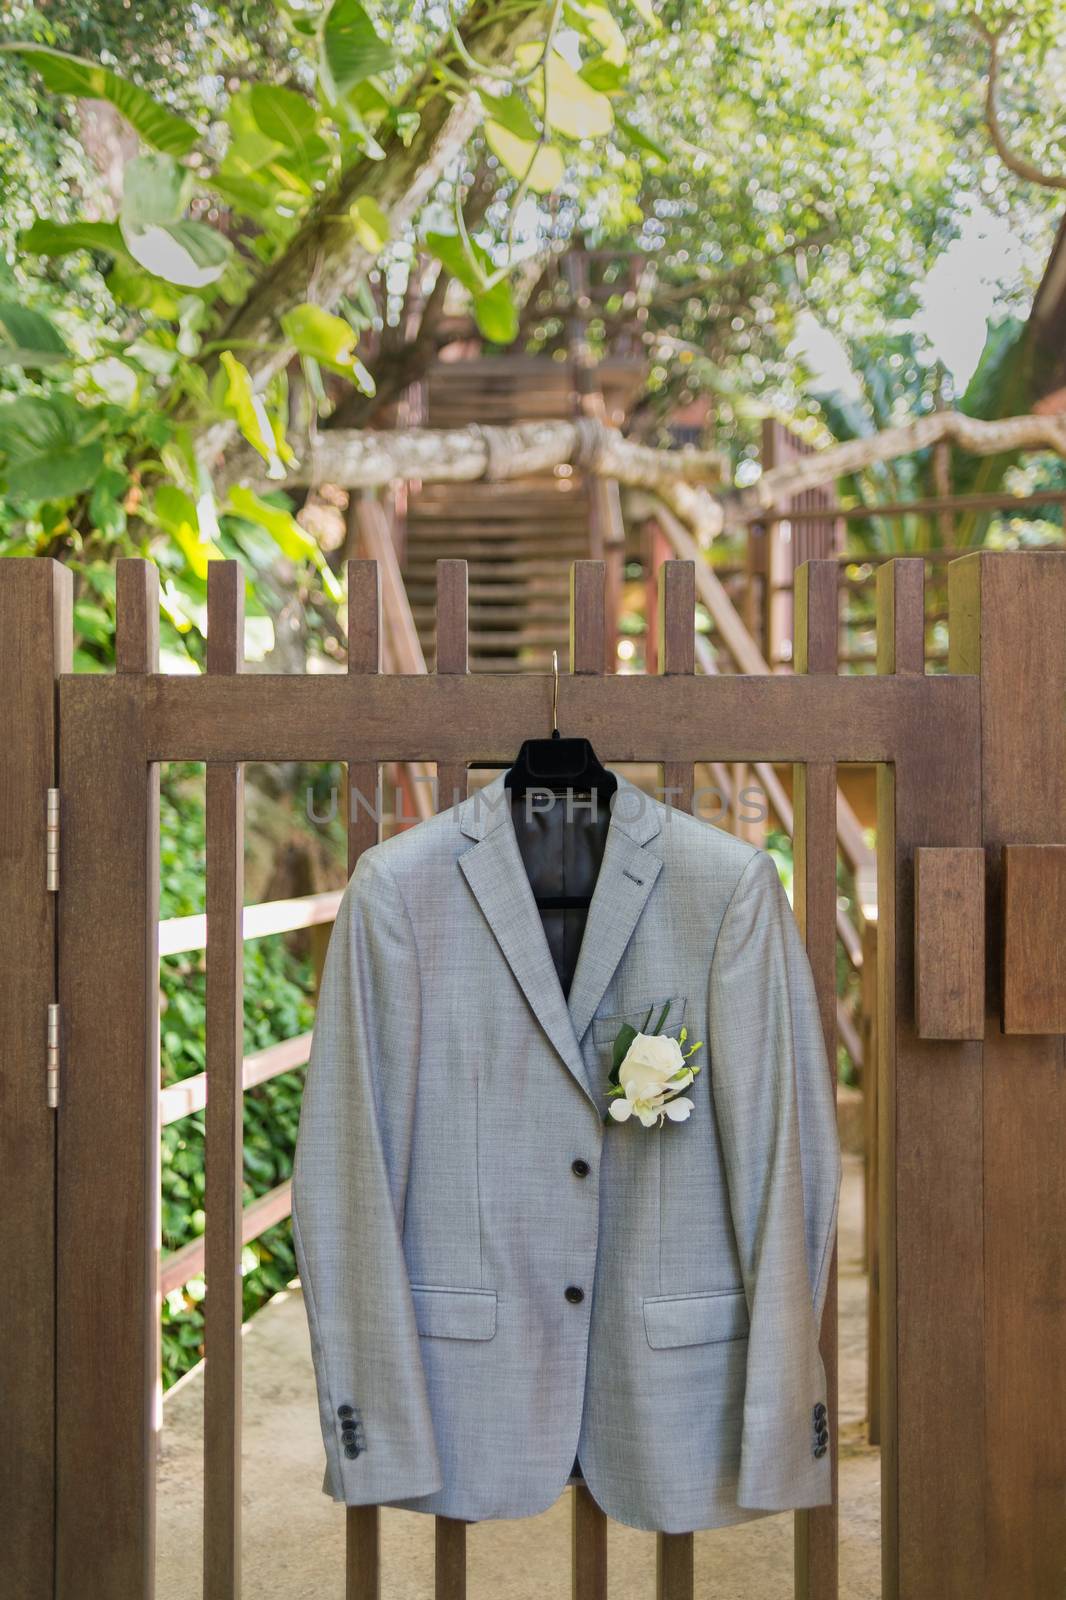 Grooms jacket hanging by fence. by hkt83000